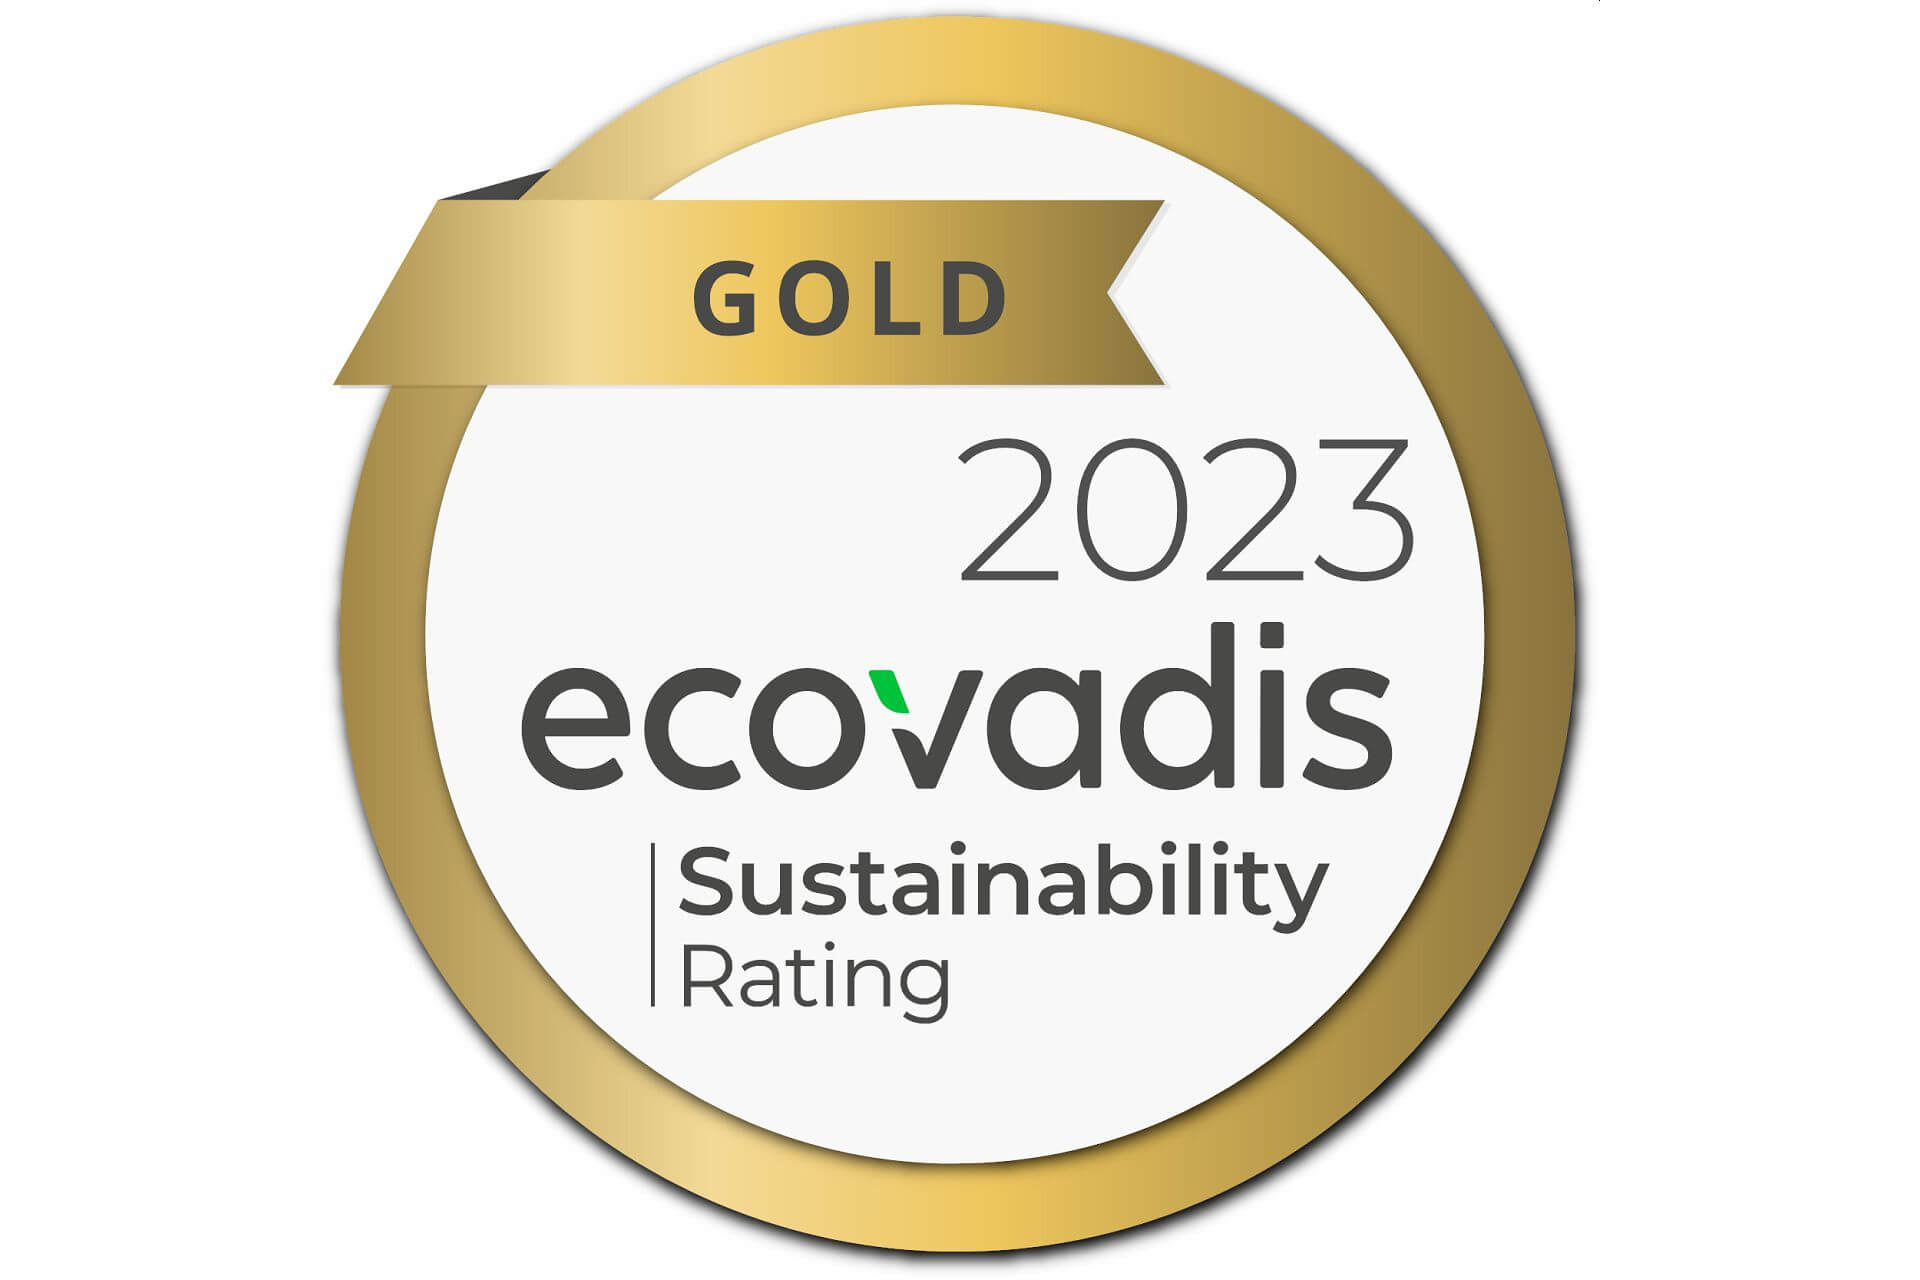 With the Ecovadis Gold Rating 2023 Schreiner Group once again proves its comprehensive sustainability goals and measures. Additional info at: www.schreiner-group.com/en/company/sustainability/